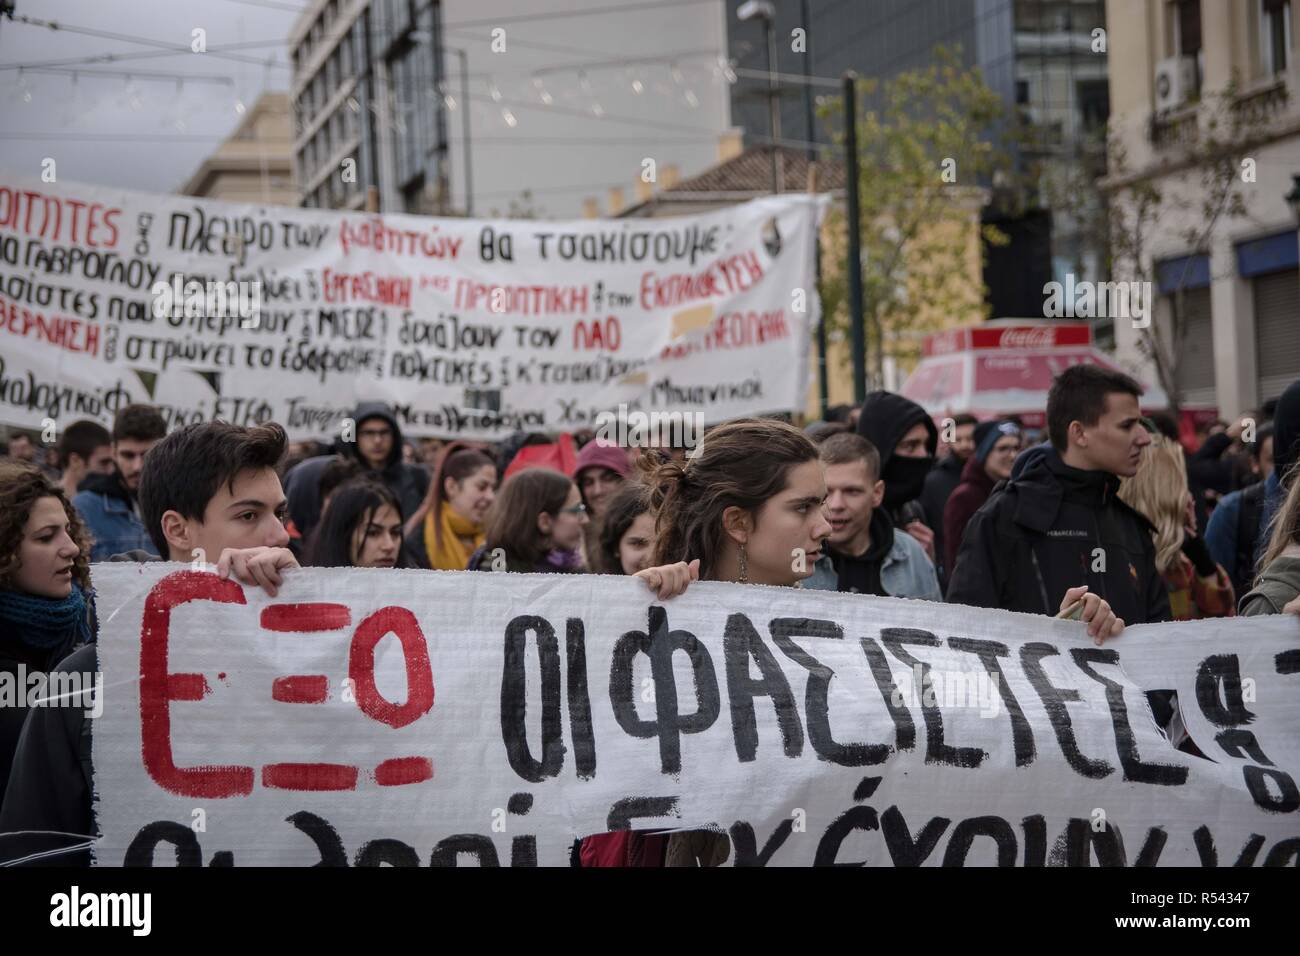 Athens, Greece. 29th Nov, 2018. Protesters are seen holding banners during the protest.Hundreds of students protest against the rise of fascism and racism in schools. Credit: Nikolas Joao Kokovlis/SOPA Images/ZUMA Wire/Alamy Live News Stock Photo